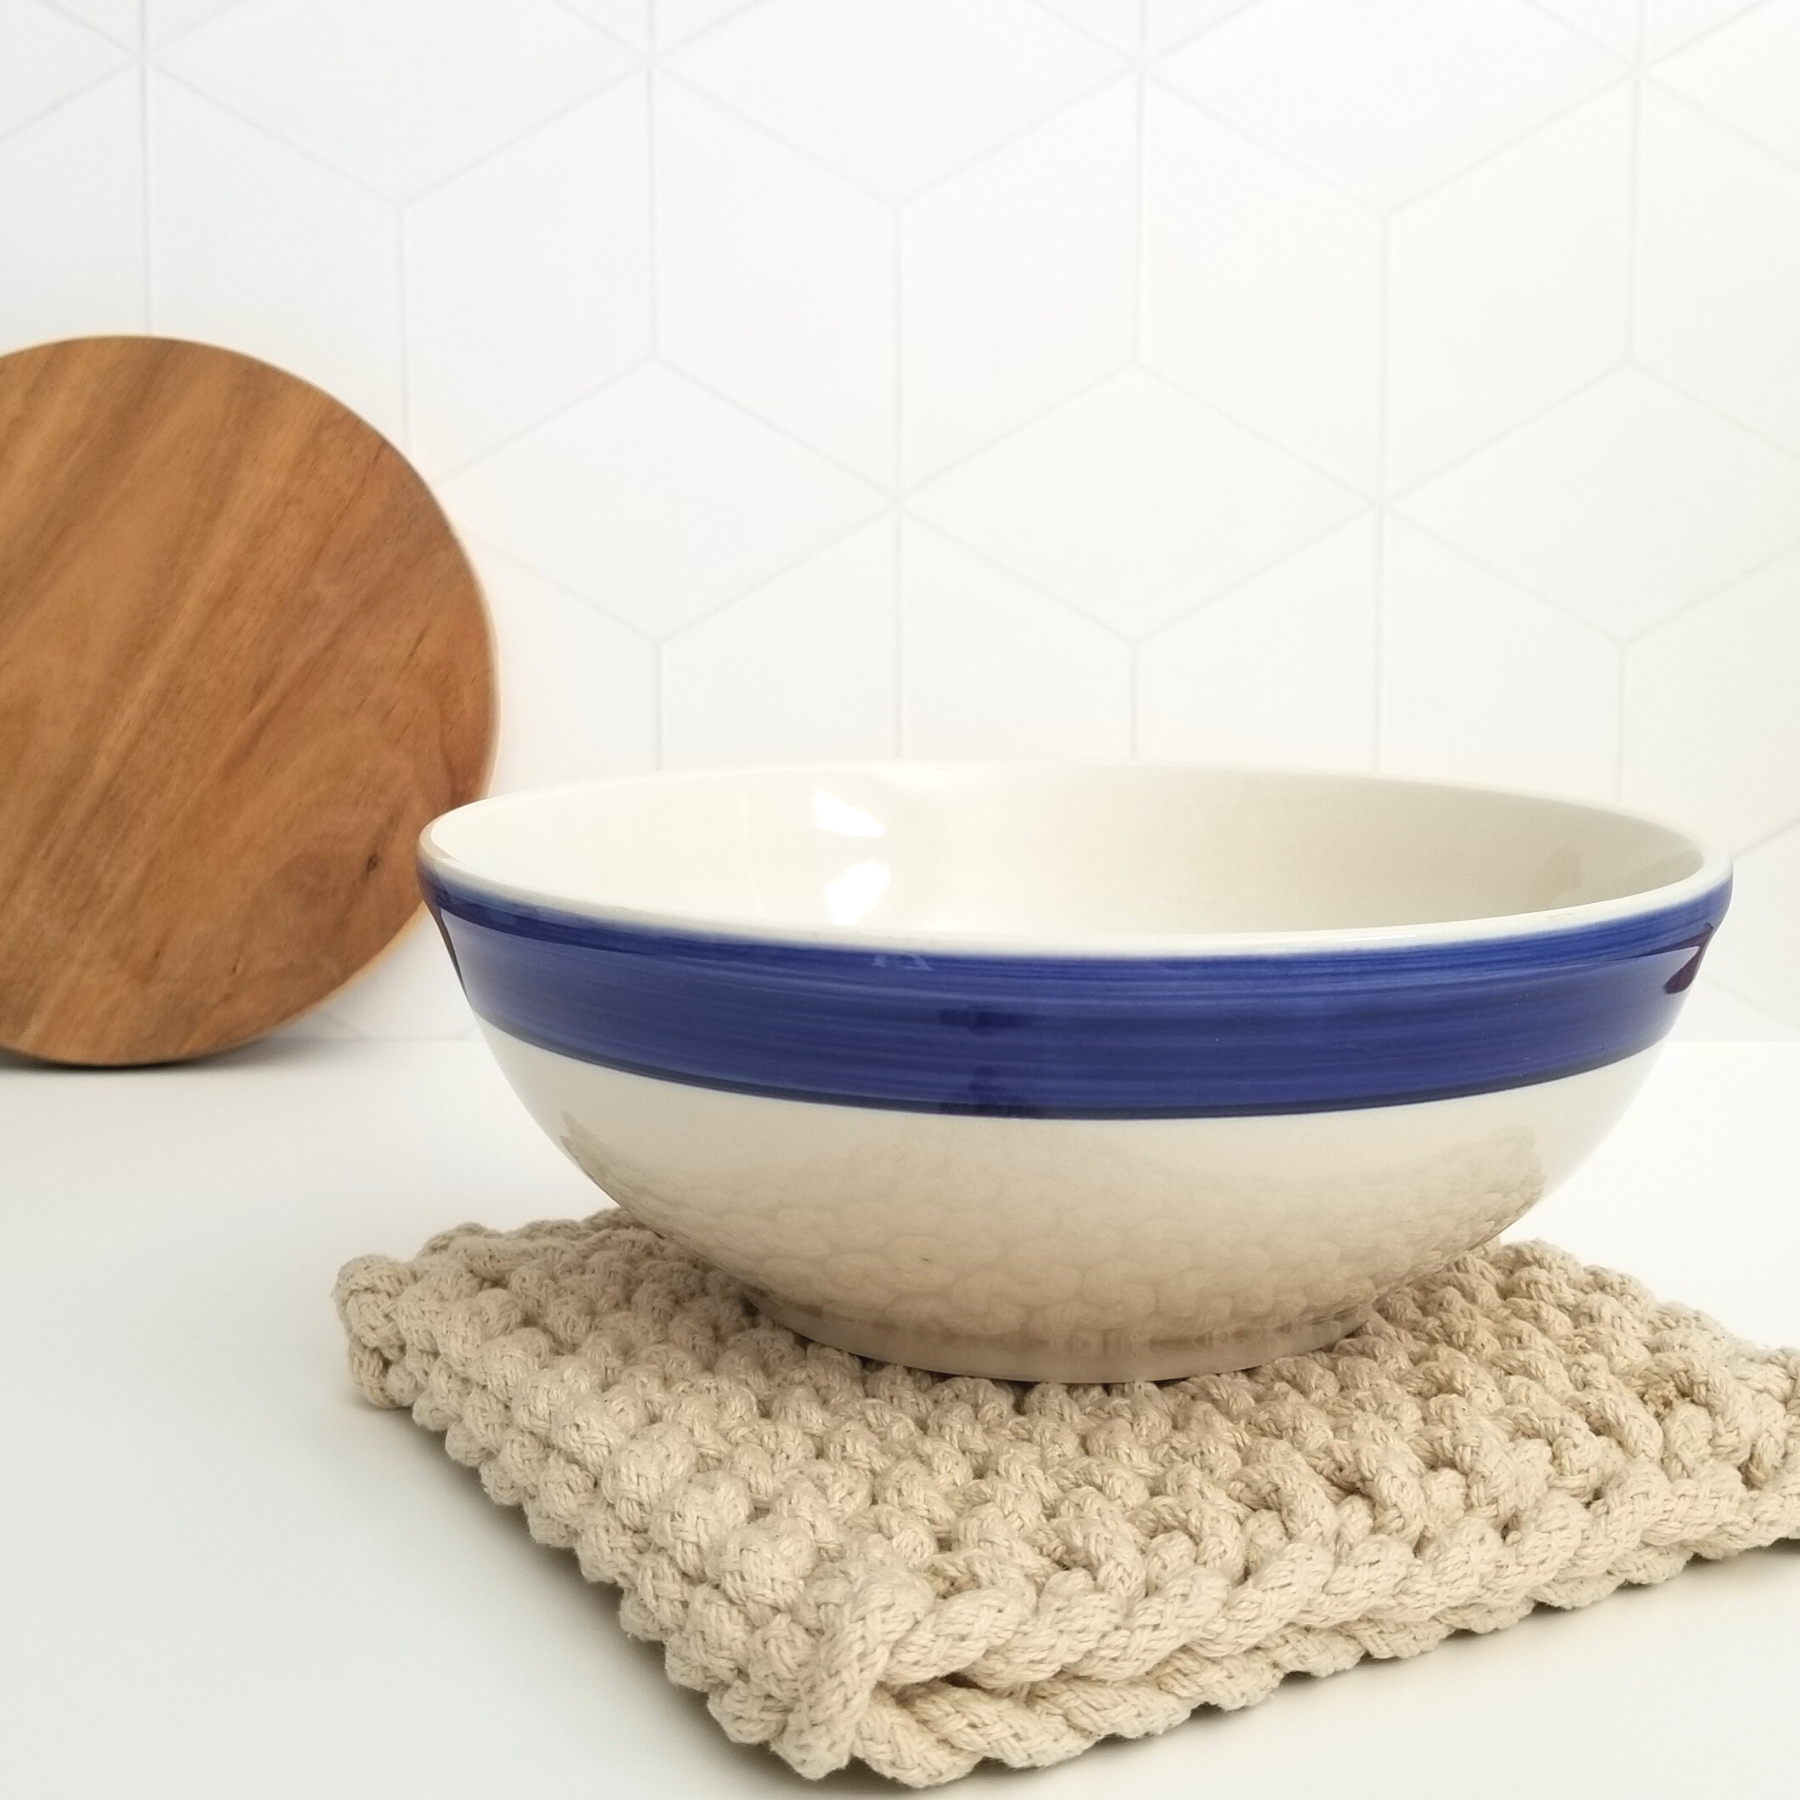 Vintage Blue and White Ceramic Mixing Bowl